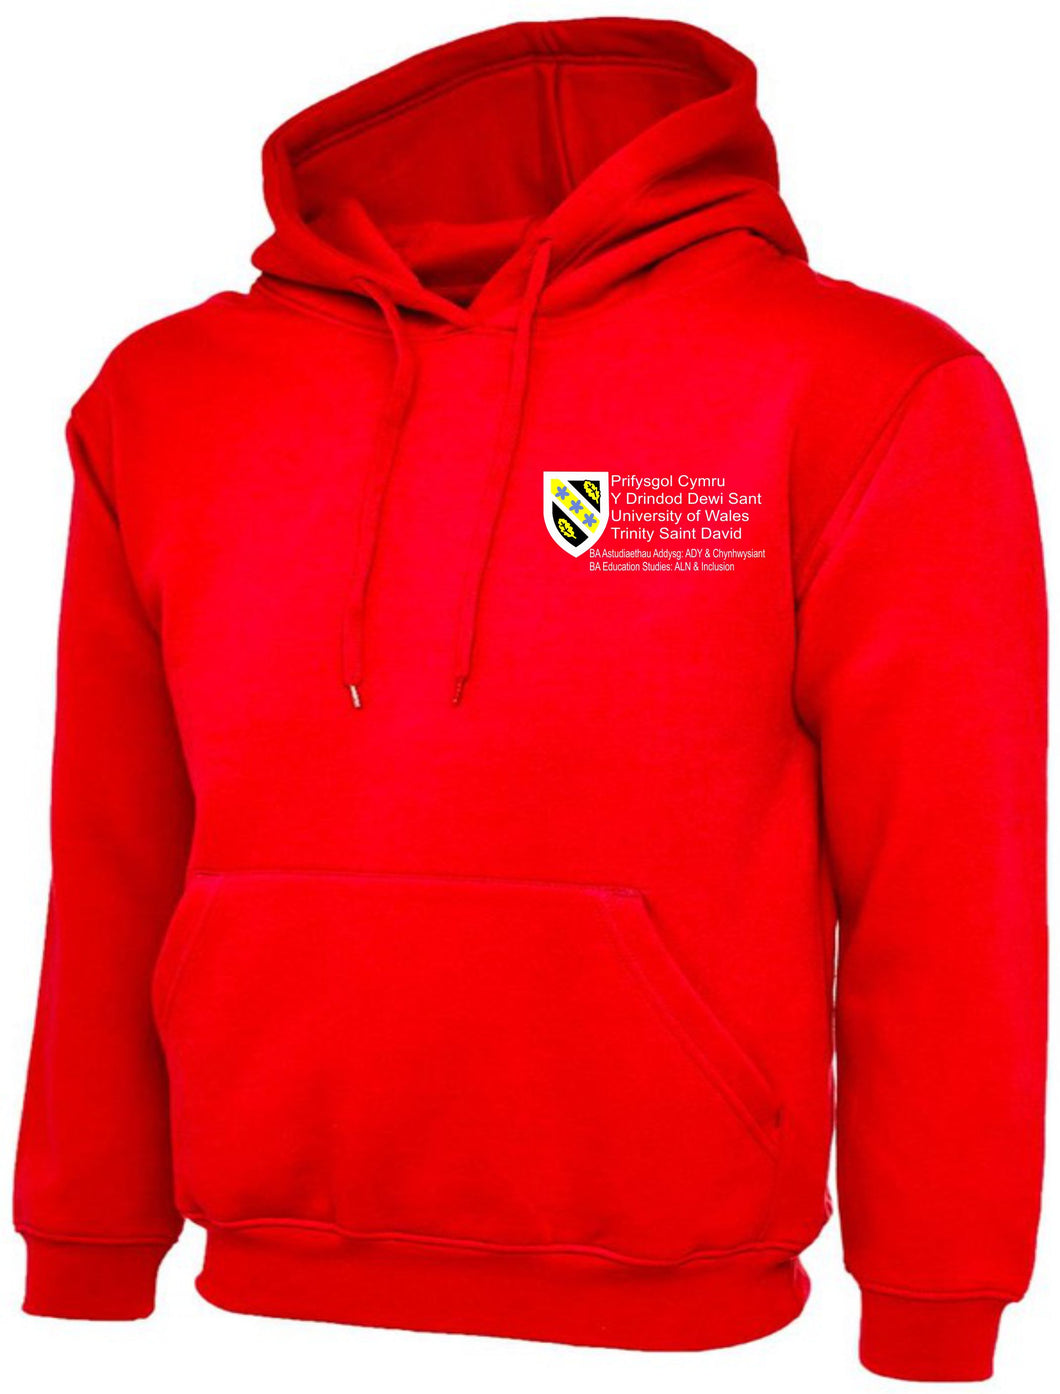 UWTSD BA Education Studies ALN and Inclusion Unisex Hood (No Refunds or Returns)